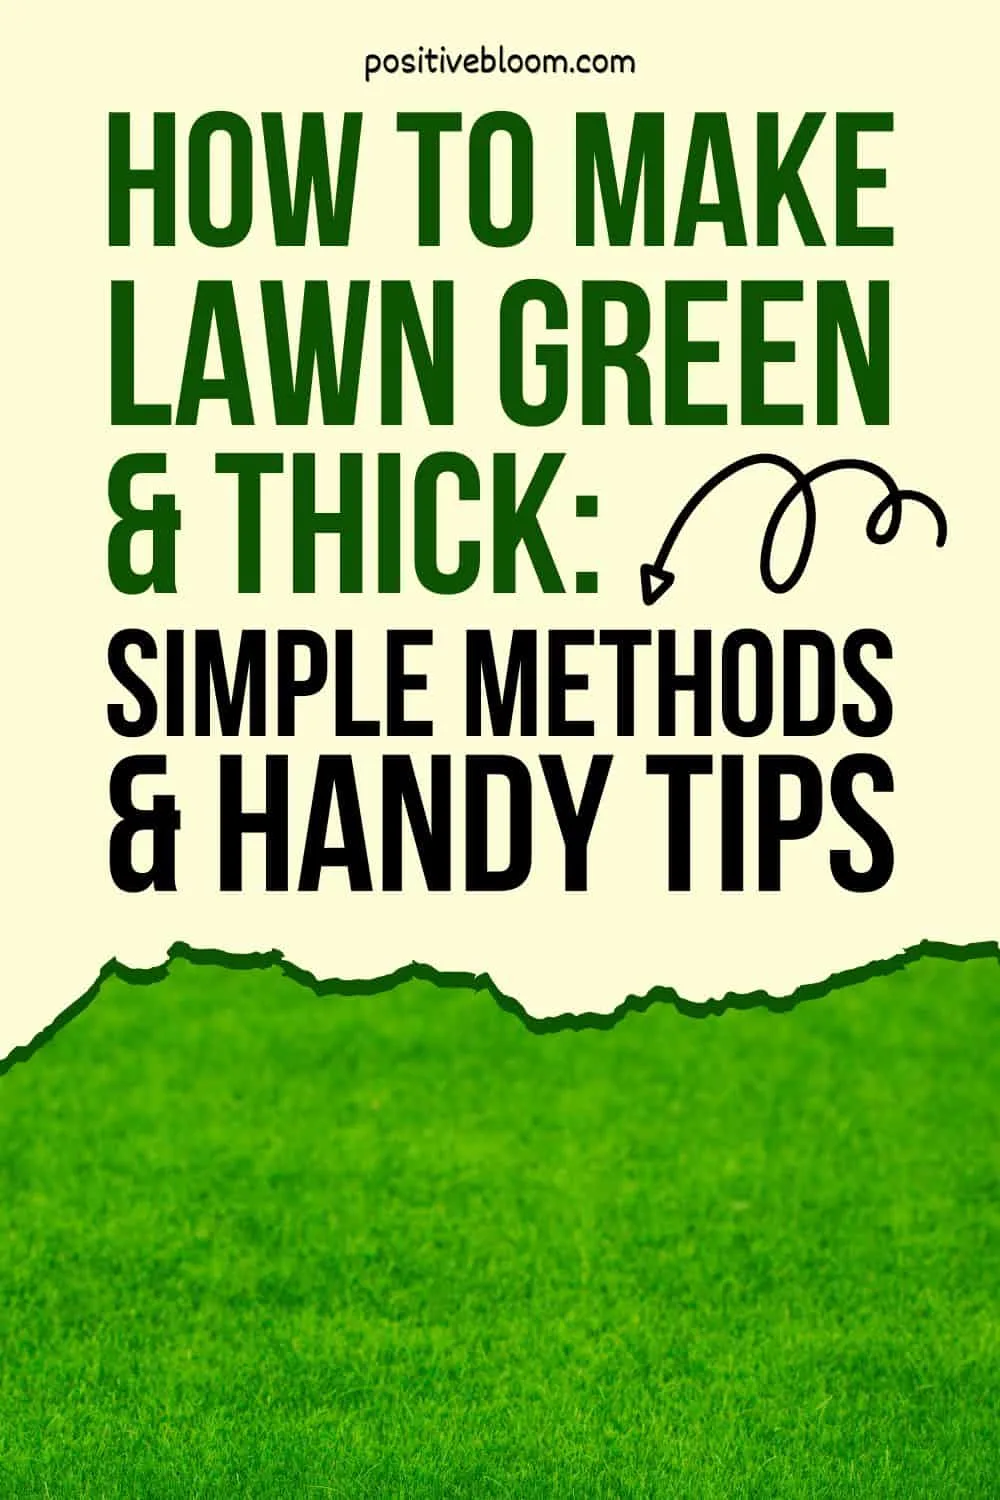 How To Make Lawn Green & Thick Simple Methods & Handy Tips Pinterest